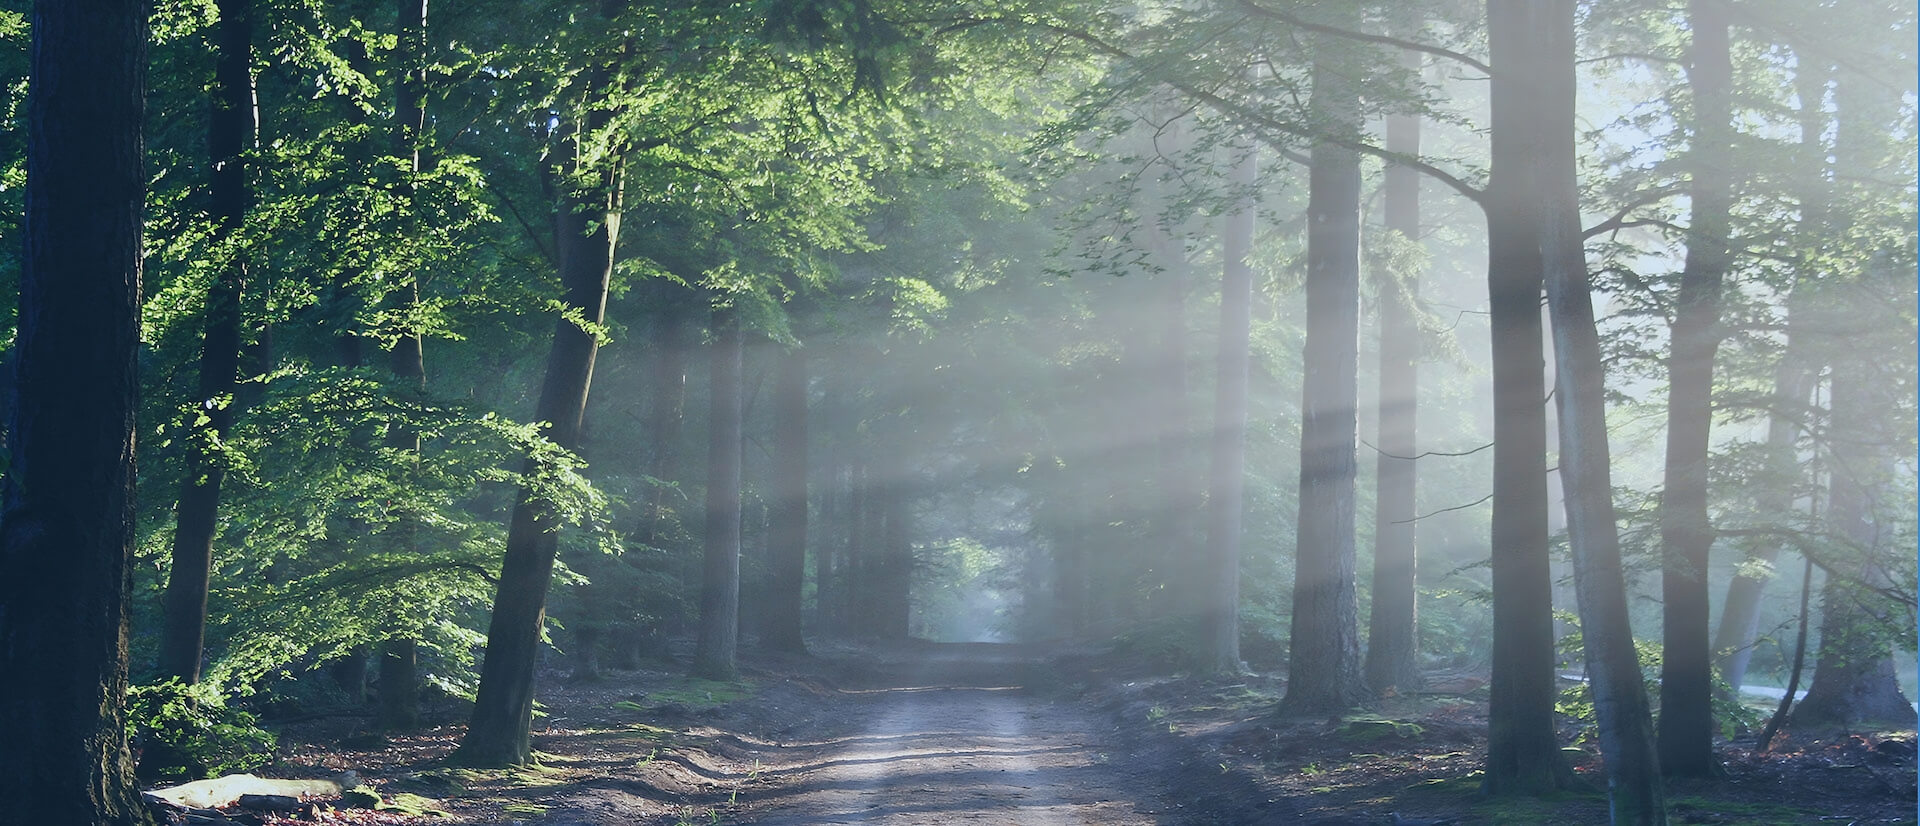 A dirt road through a forest with sun rays shining through the trees.